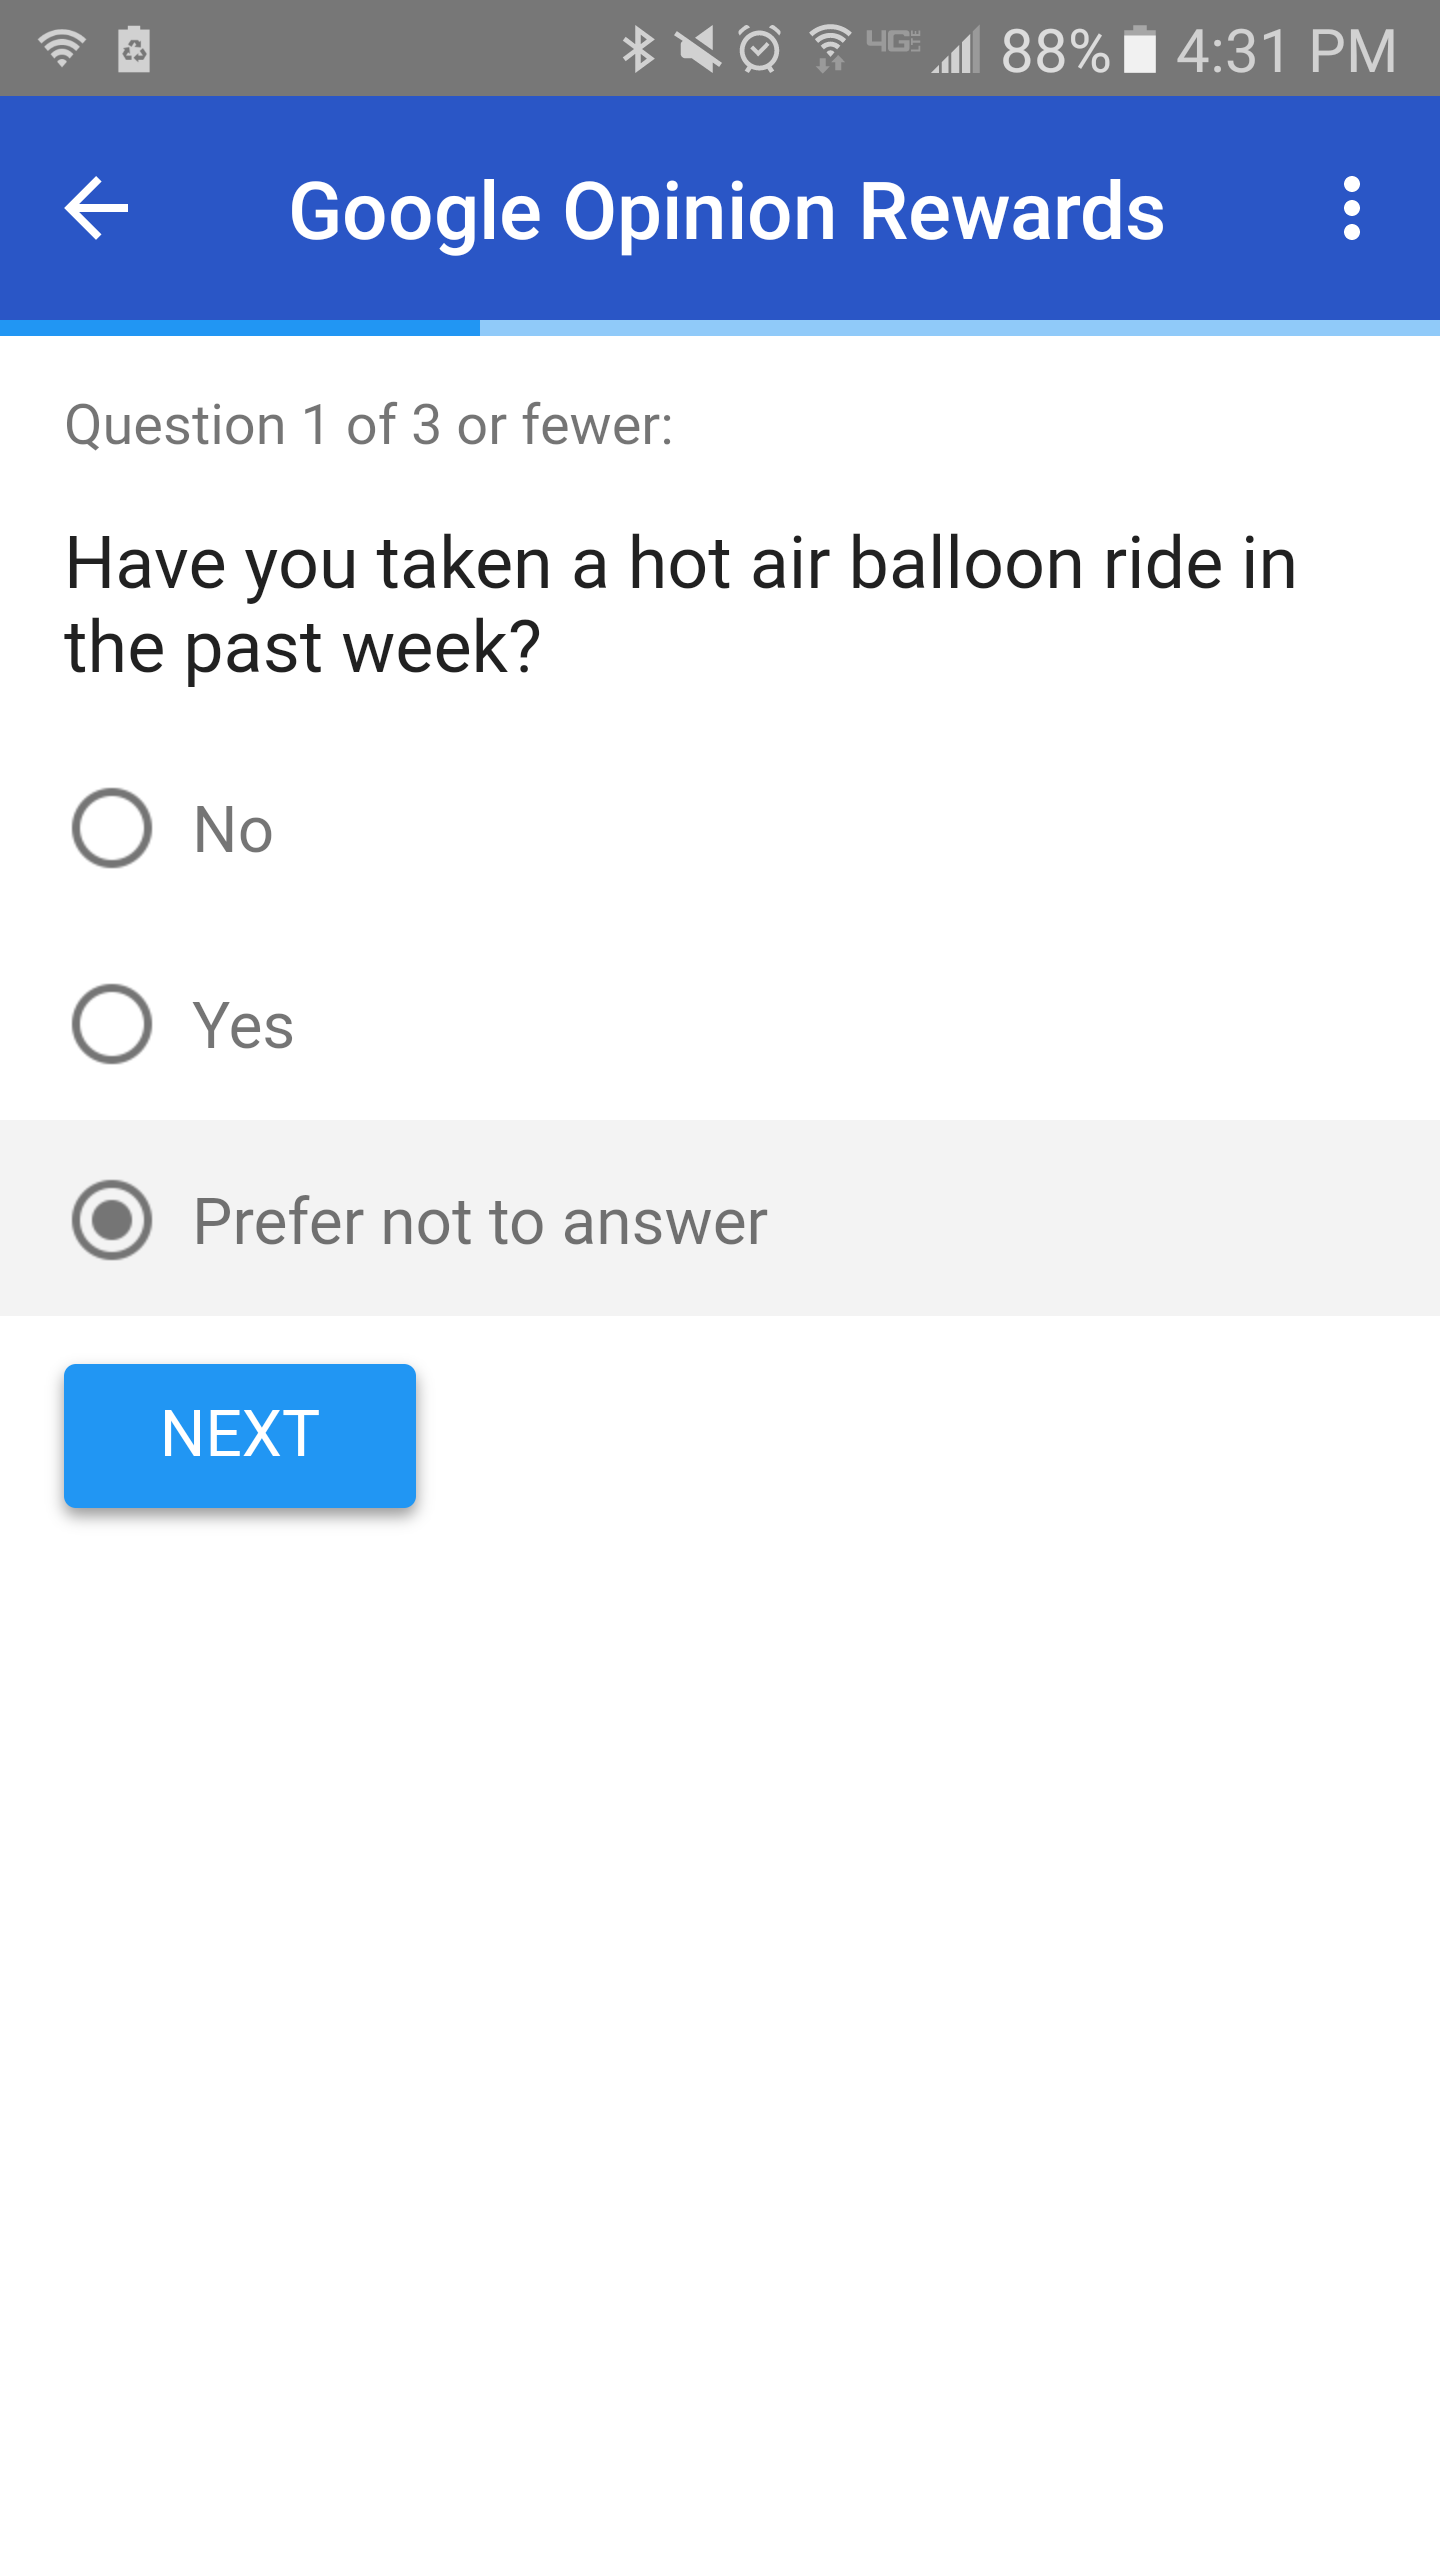 web page - ?4 88% i If Google Opinion Rewards ! Question 1 of 3 or fewer Have you taken a hot air balloon ride in the past week? O No O Yes O Prefer not to answer Next